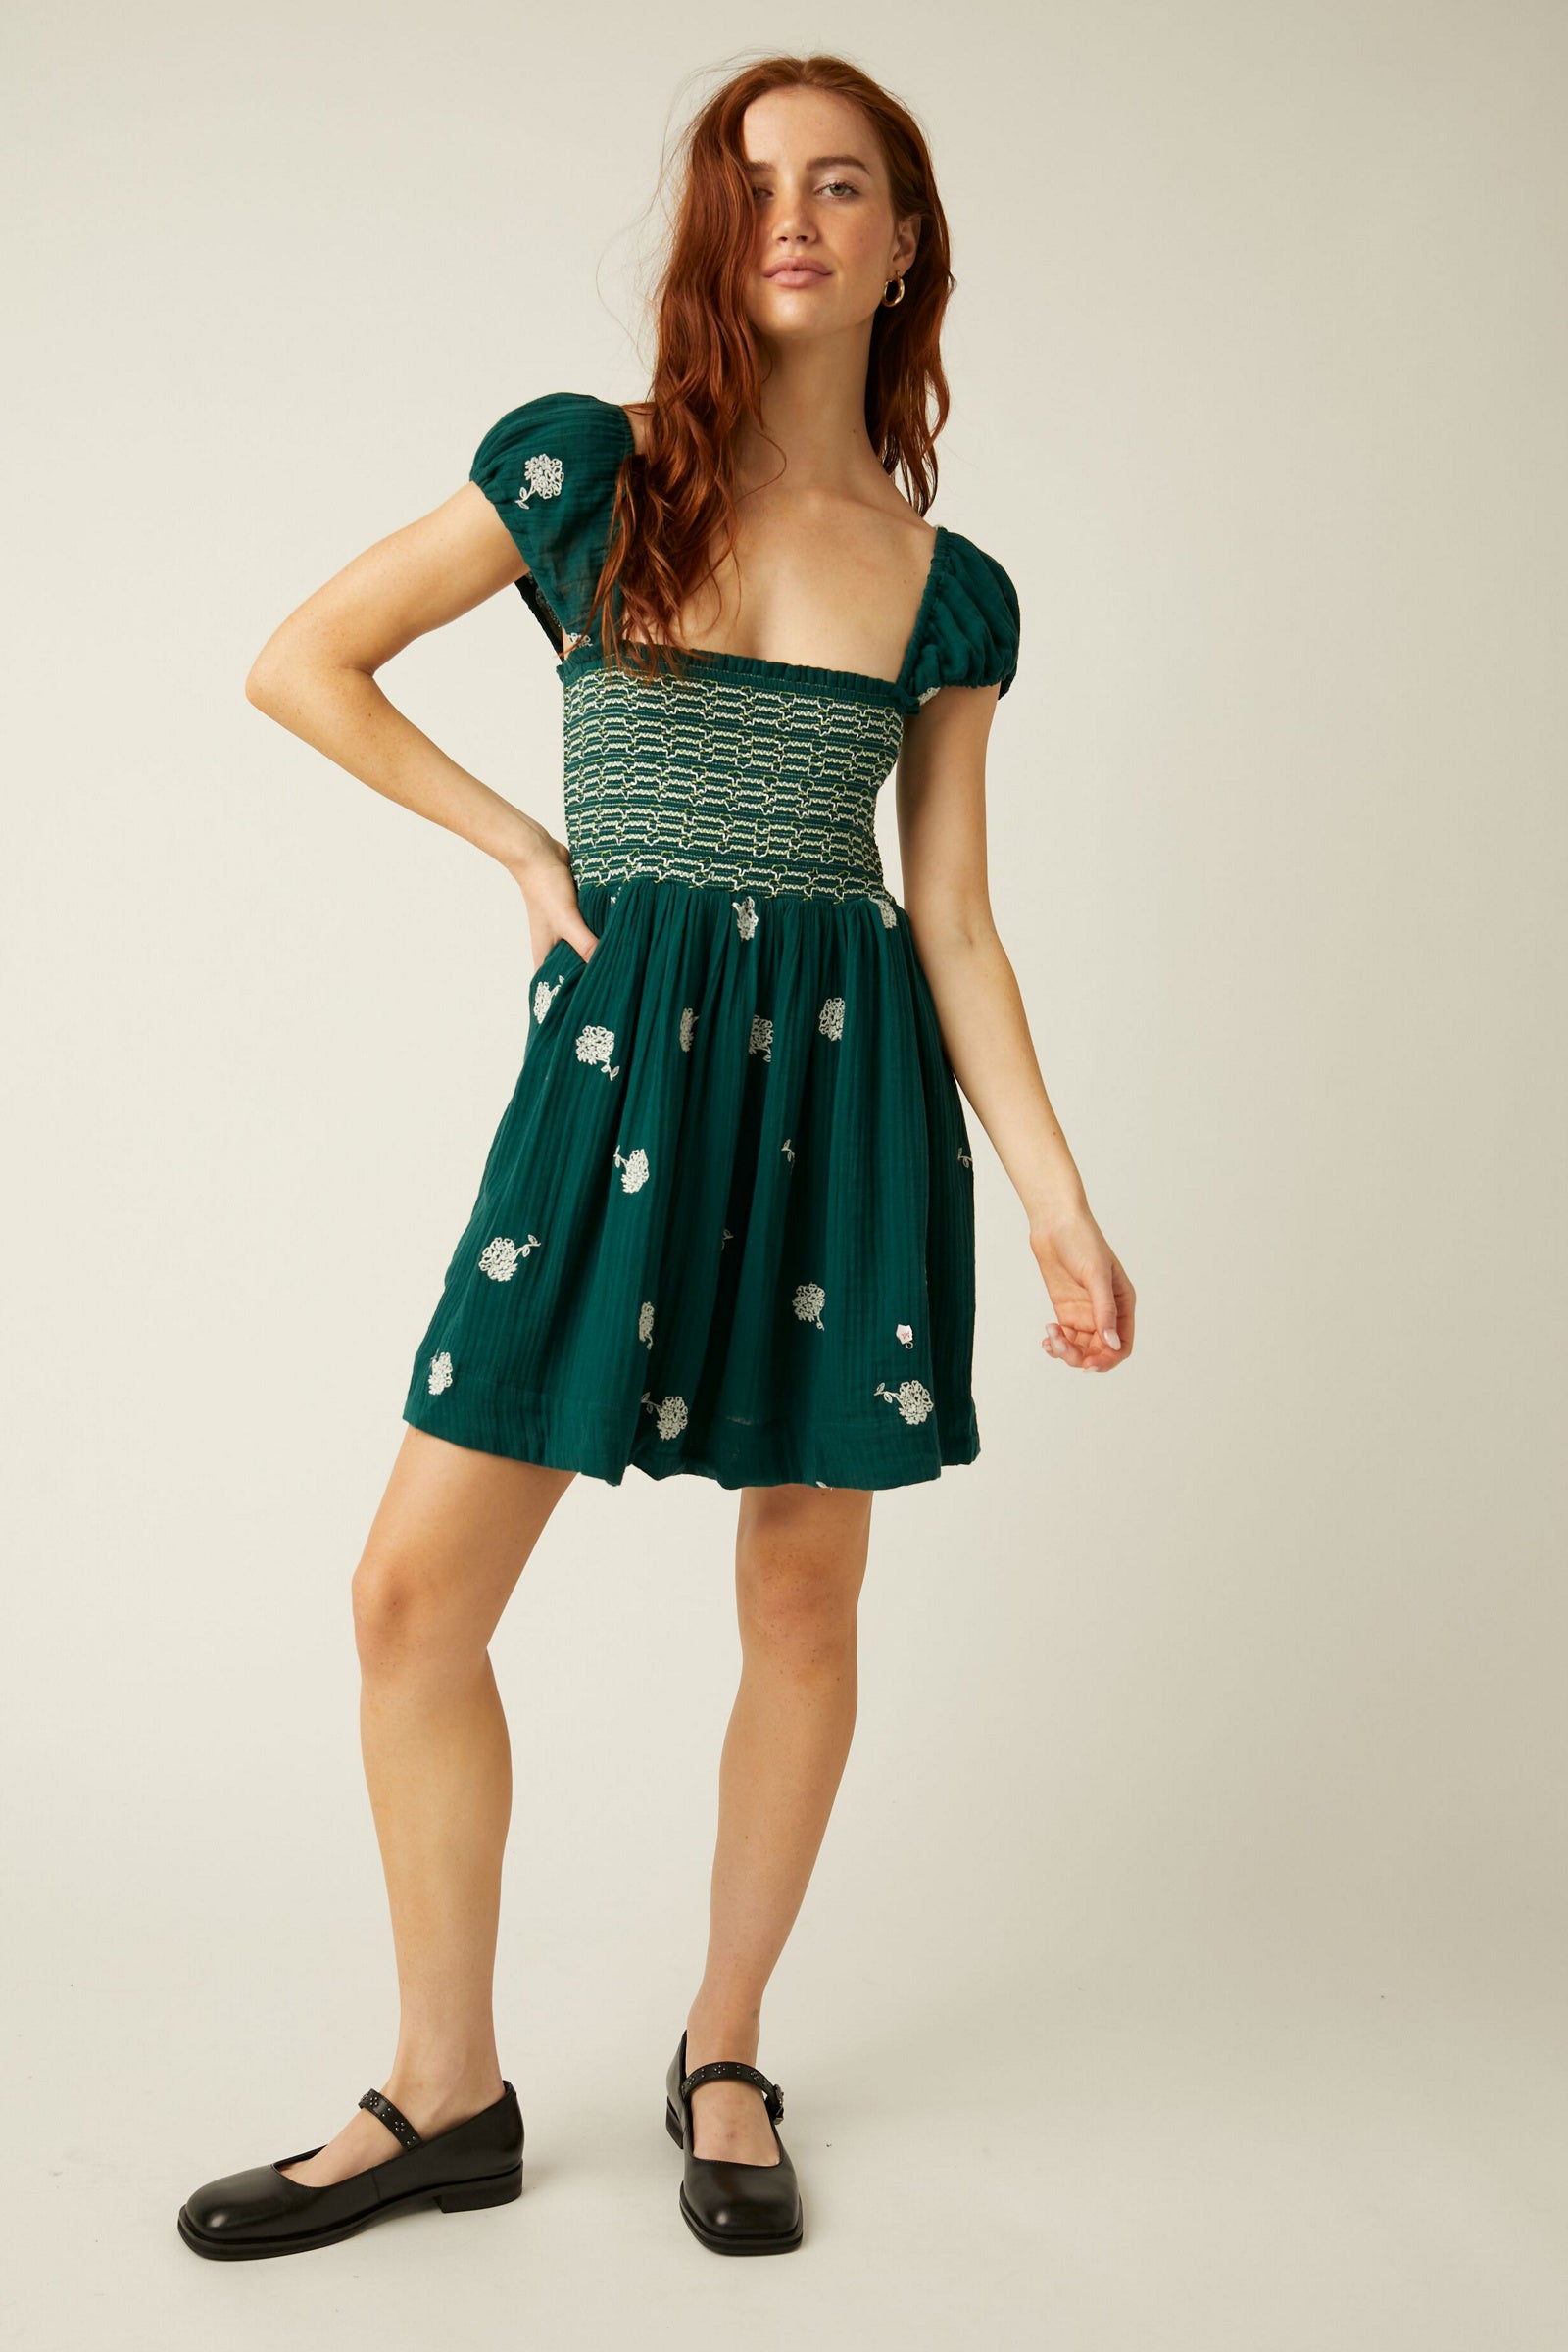 FREE PEOPLE TORY EMBROIDERED MINI DRESS IN JUNEBUG